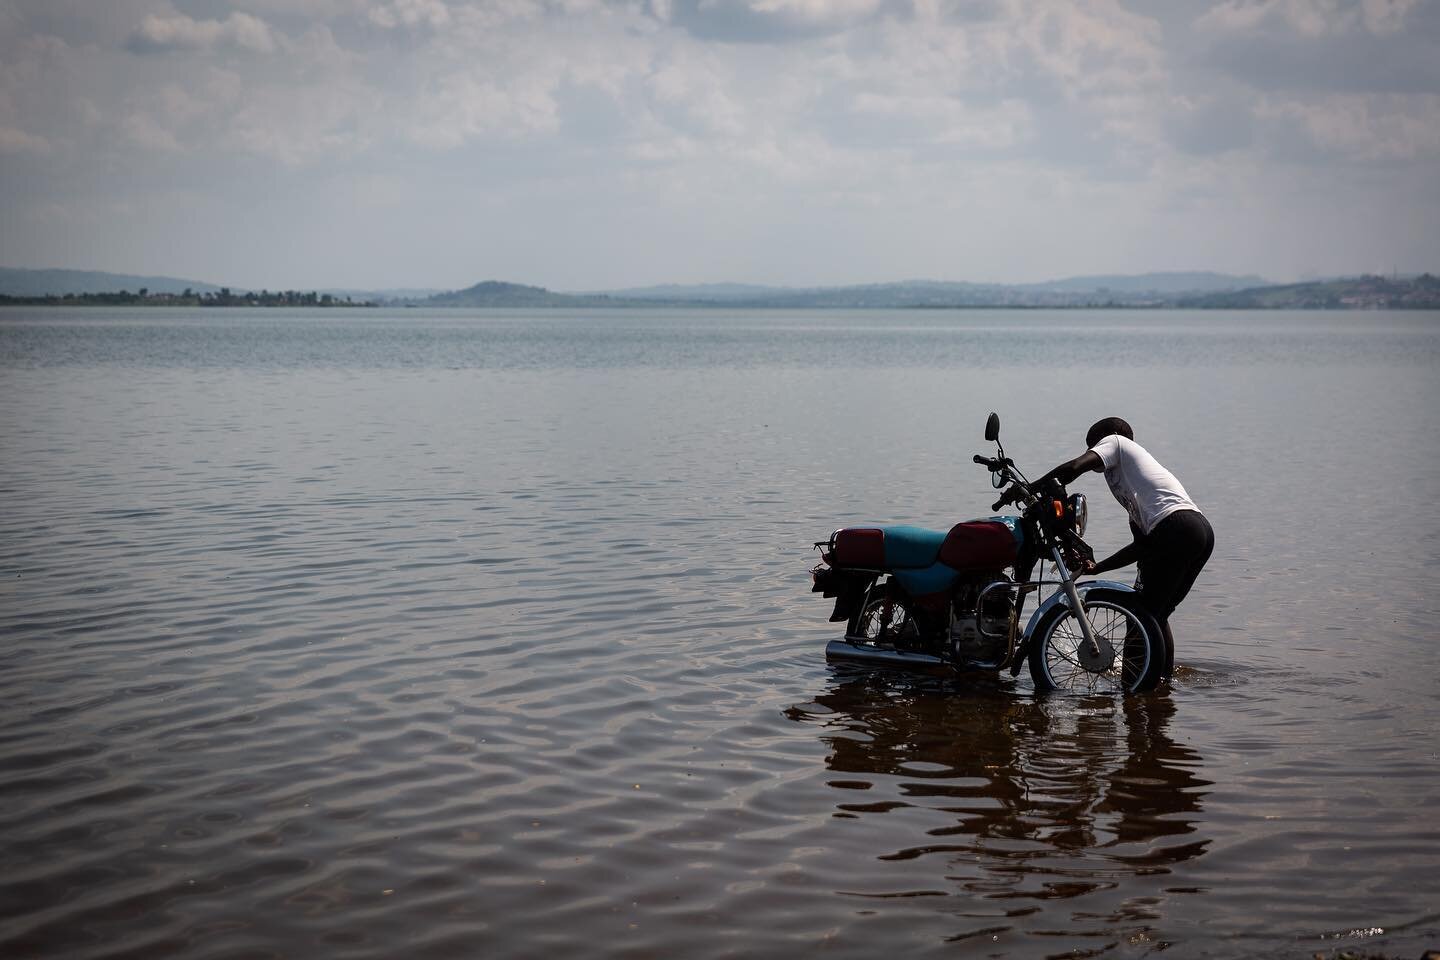 Motorbikes are a very common form of transportation in Uganda and they also serve as taxis, covering areas that vans don&rsquo;t. There are many unpaved roads that generate a lot of dust and dirt. As such, you regularly see the drivers washing their 